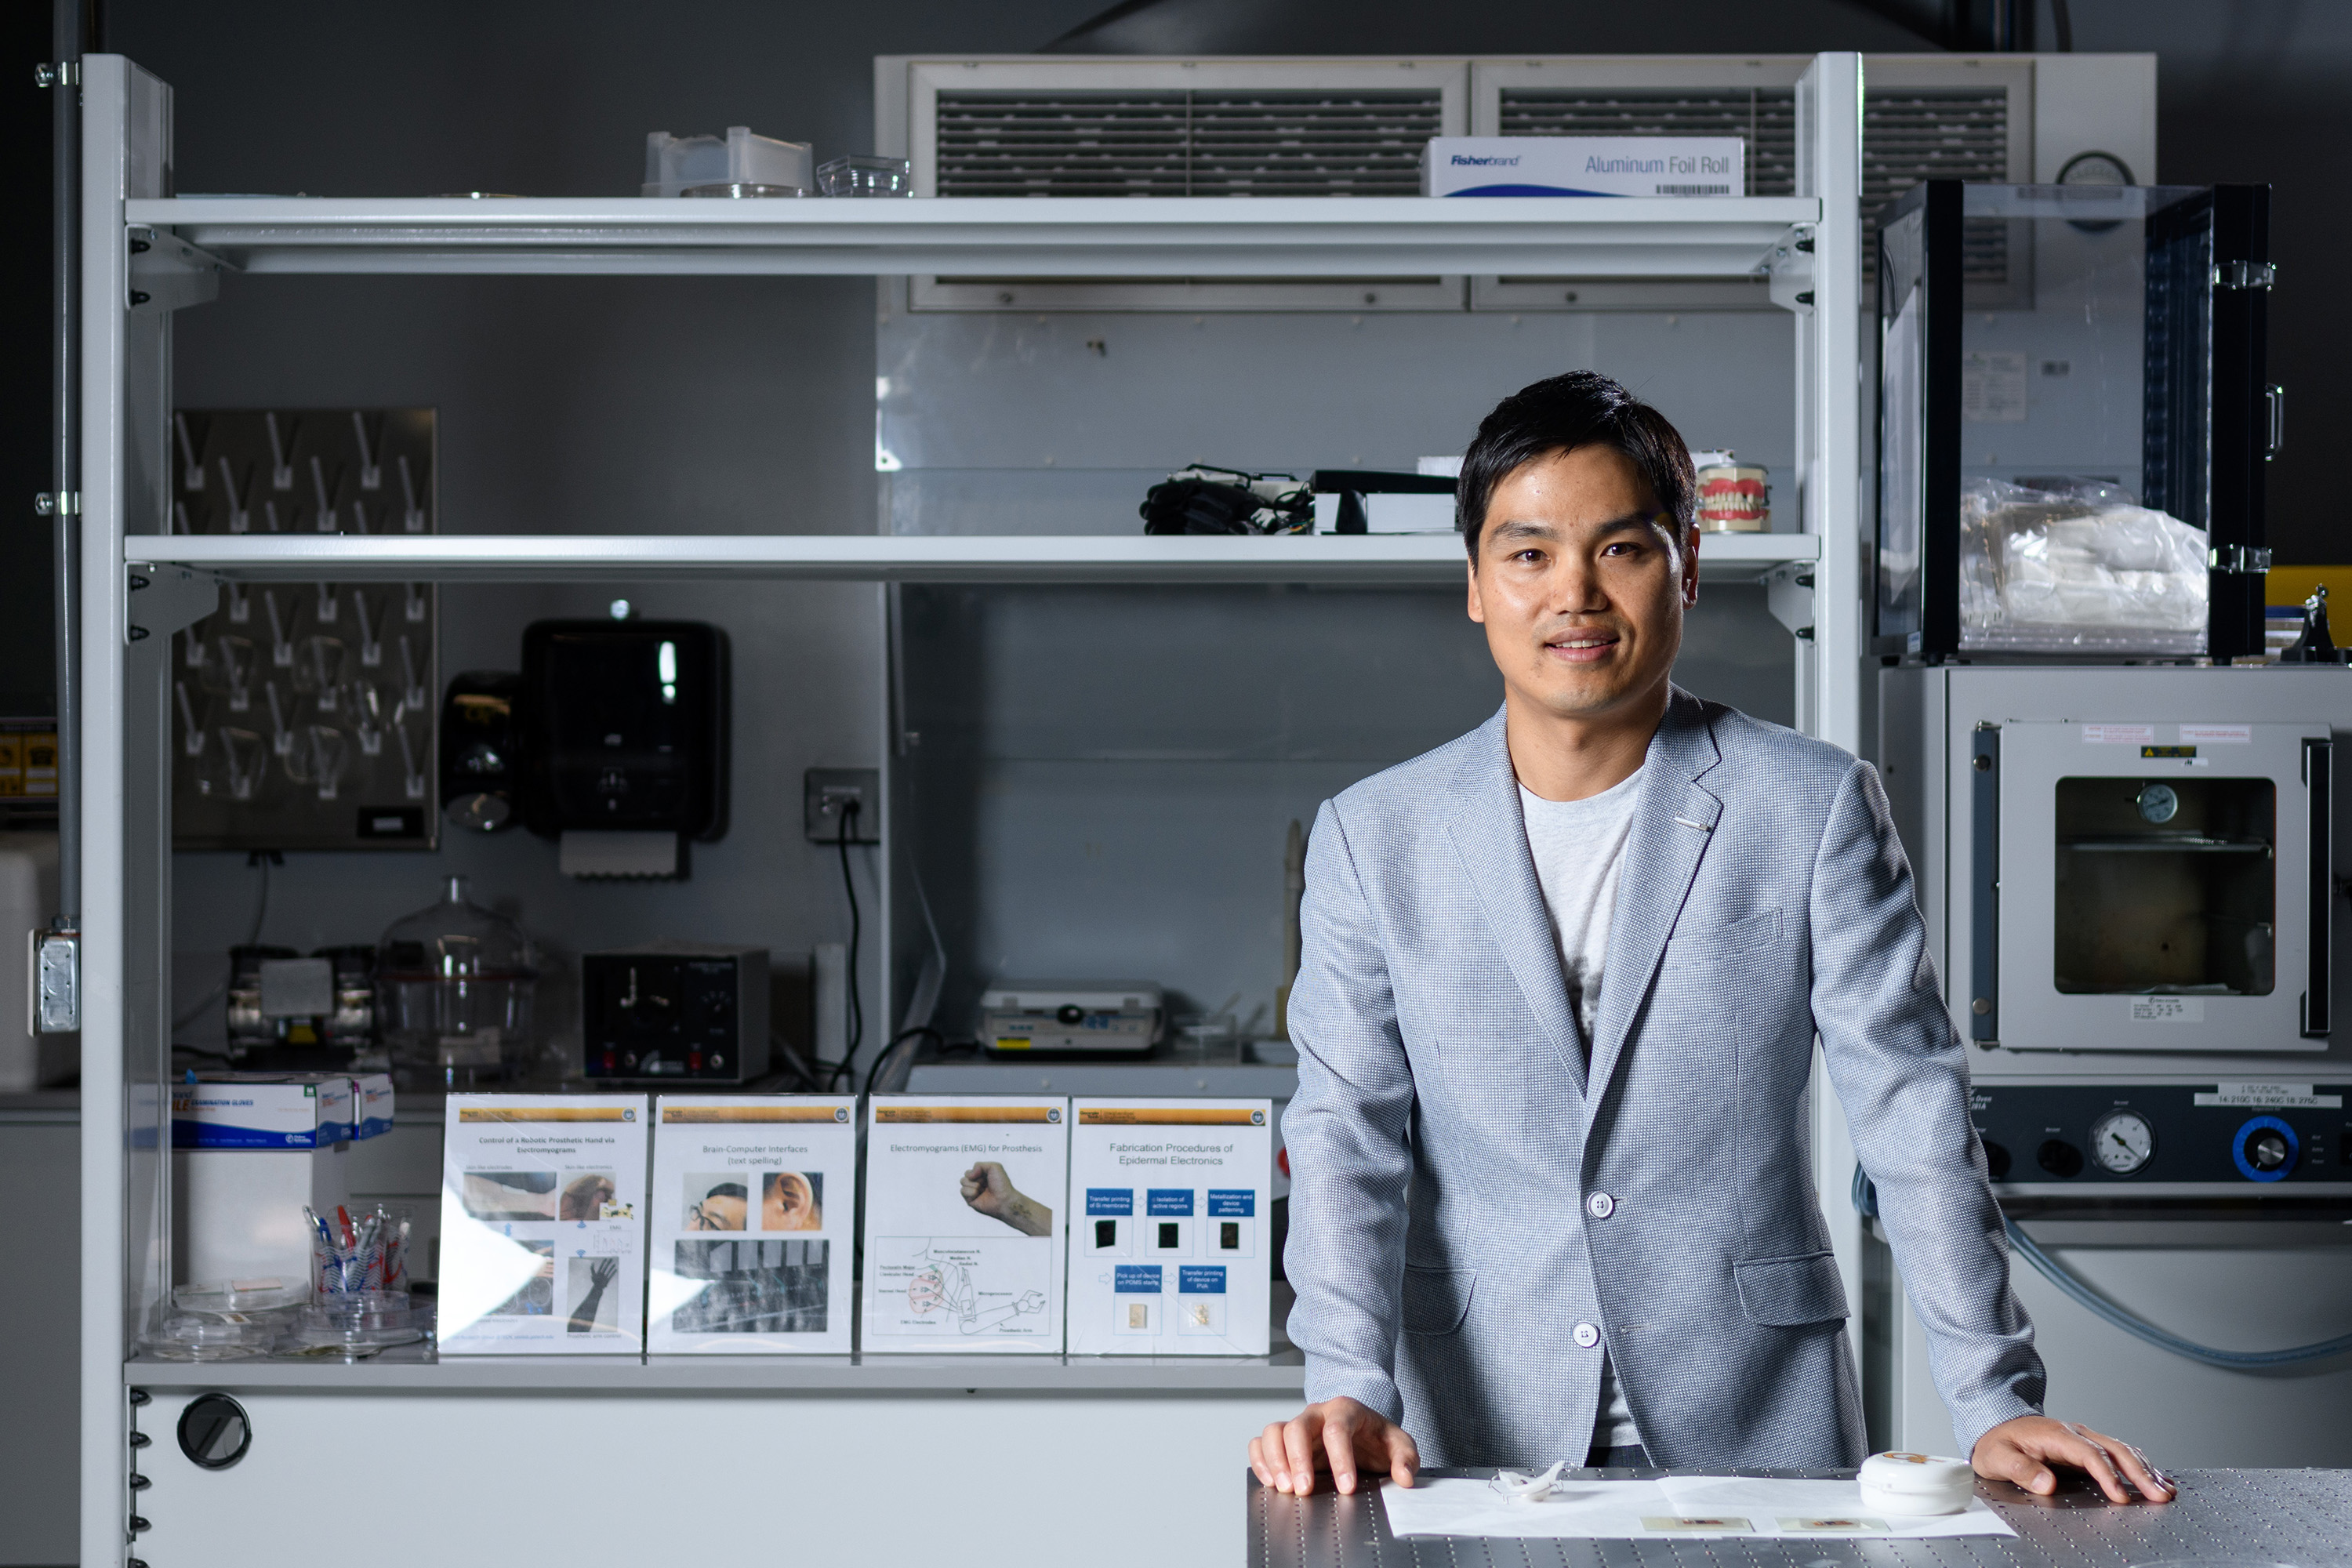 Woon-Hong Yeo, an assistant professor in the Woodruff School of Mechanical Engineering and Institute for Electronics and Nanotechnology at the Georgia Institute of Technology, is shown with the sodium sensor in his laboratory. (Credit: Rob Felt, Georgia Tech).